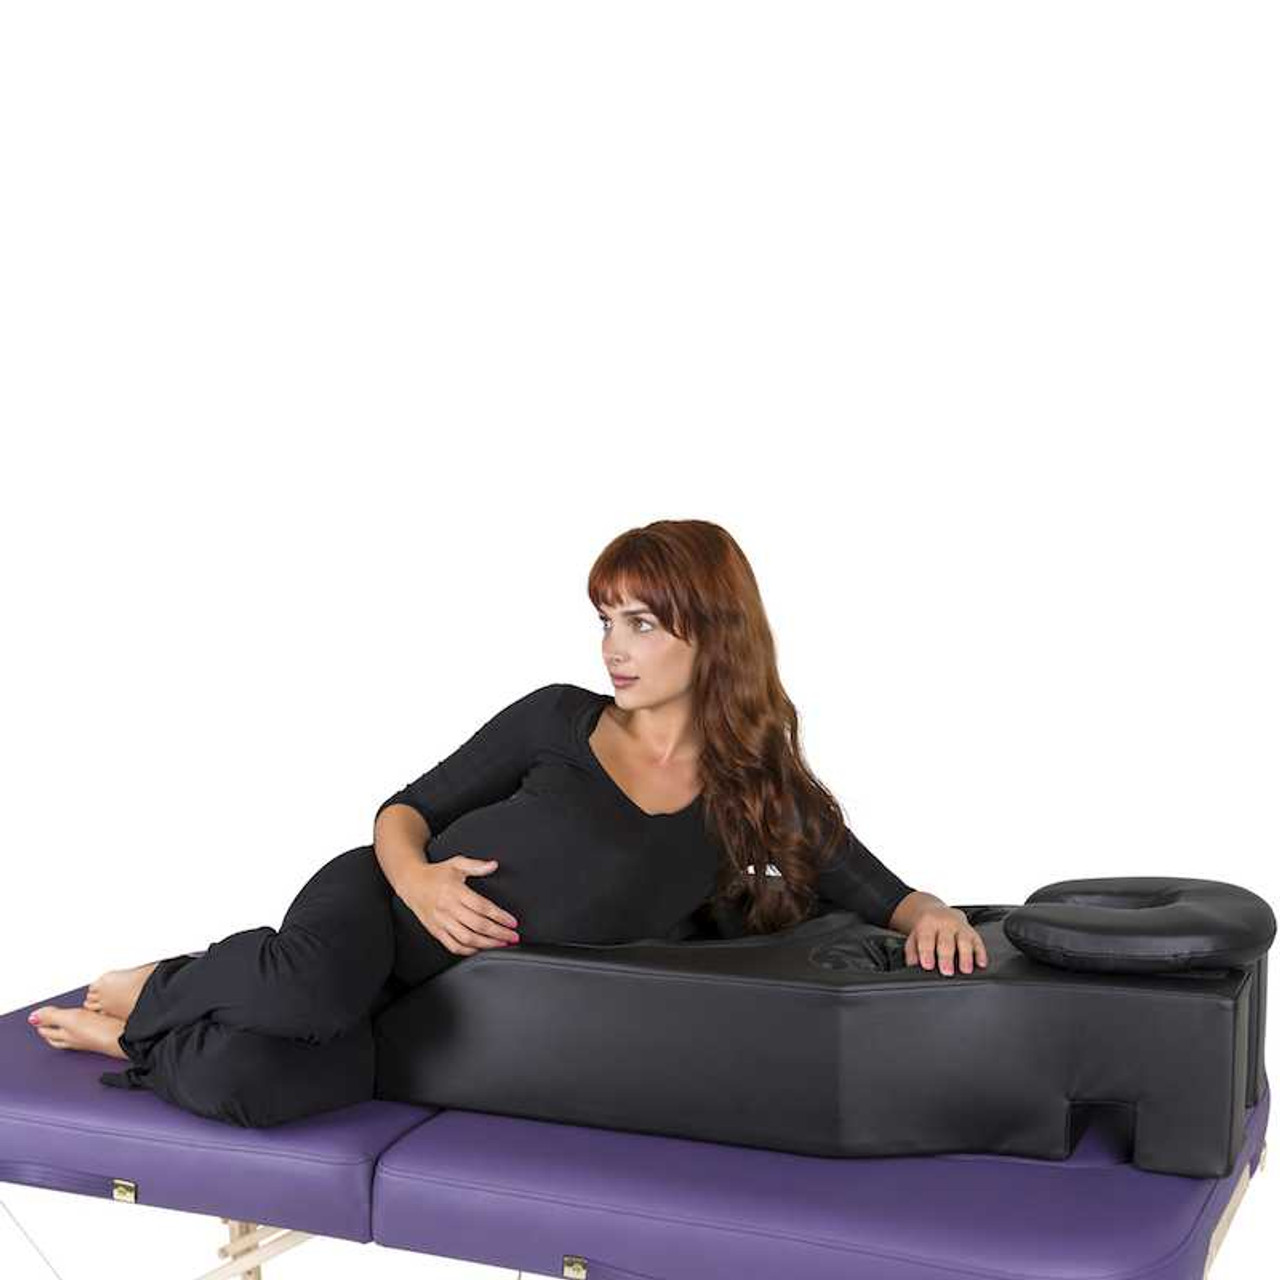 https://cdn11.bigcommerce.com/s-h0a6ja7/images/stencil/1280x1280/products/91/10860/Earthlite-Pregnancy-Prone-Cushion-with-Headrest-EarthLite_2552__34071.1674565876.jpg?c=2